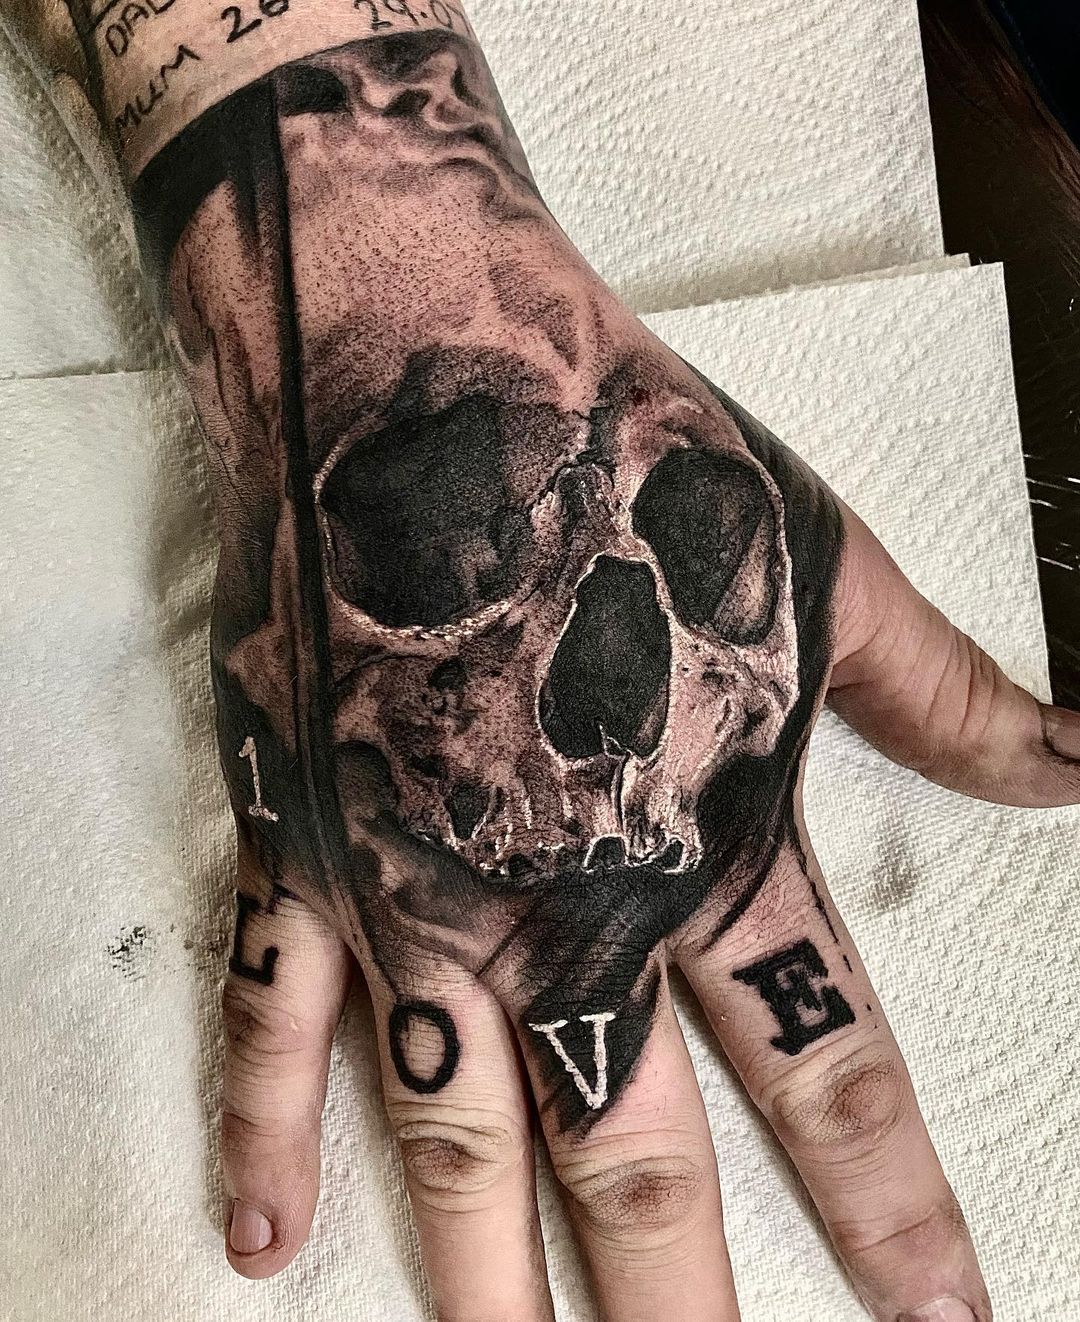 Popular 33 of Meaningful Skull Tattoos For Men That Will Blow Your Mind